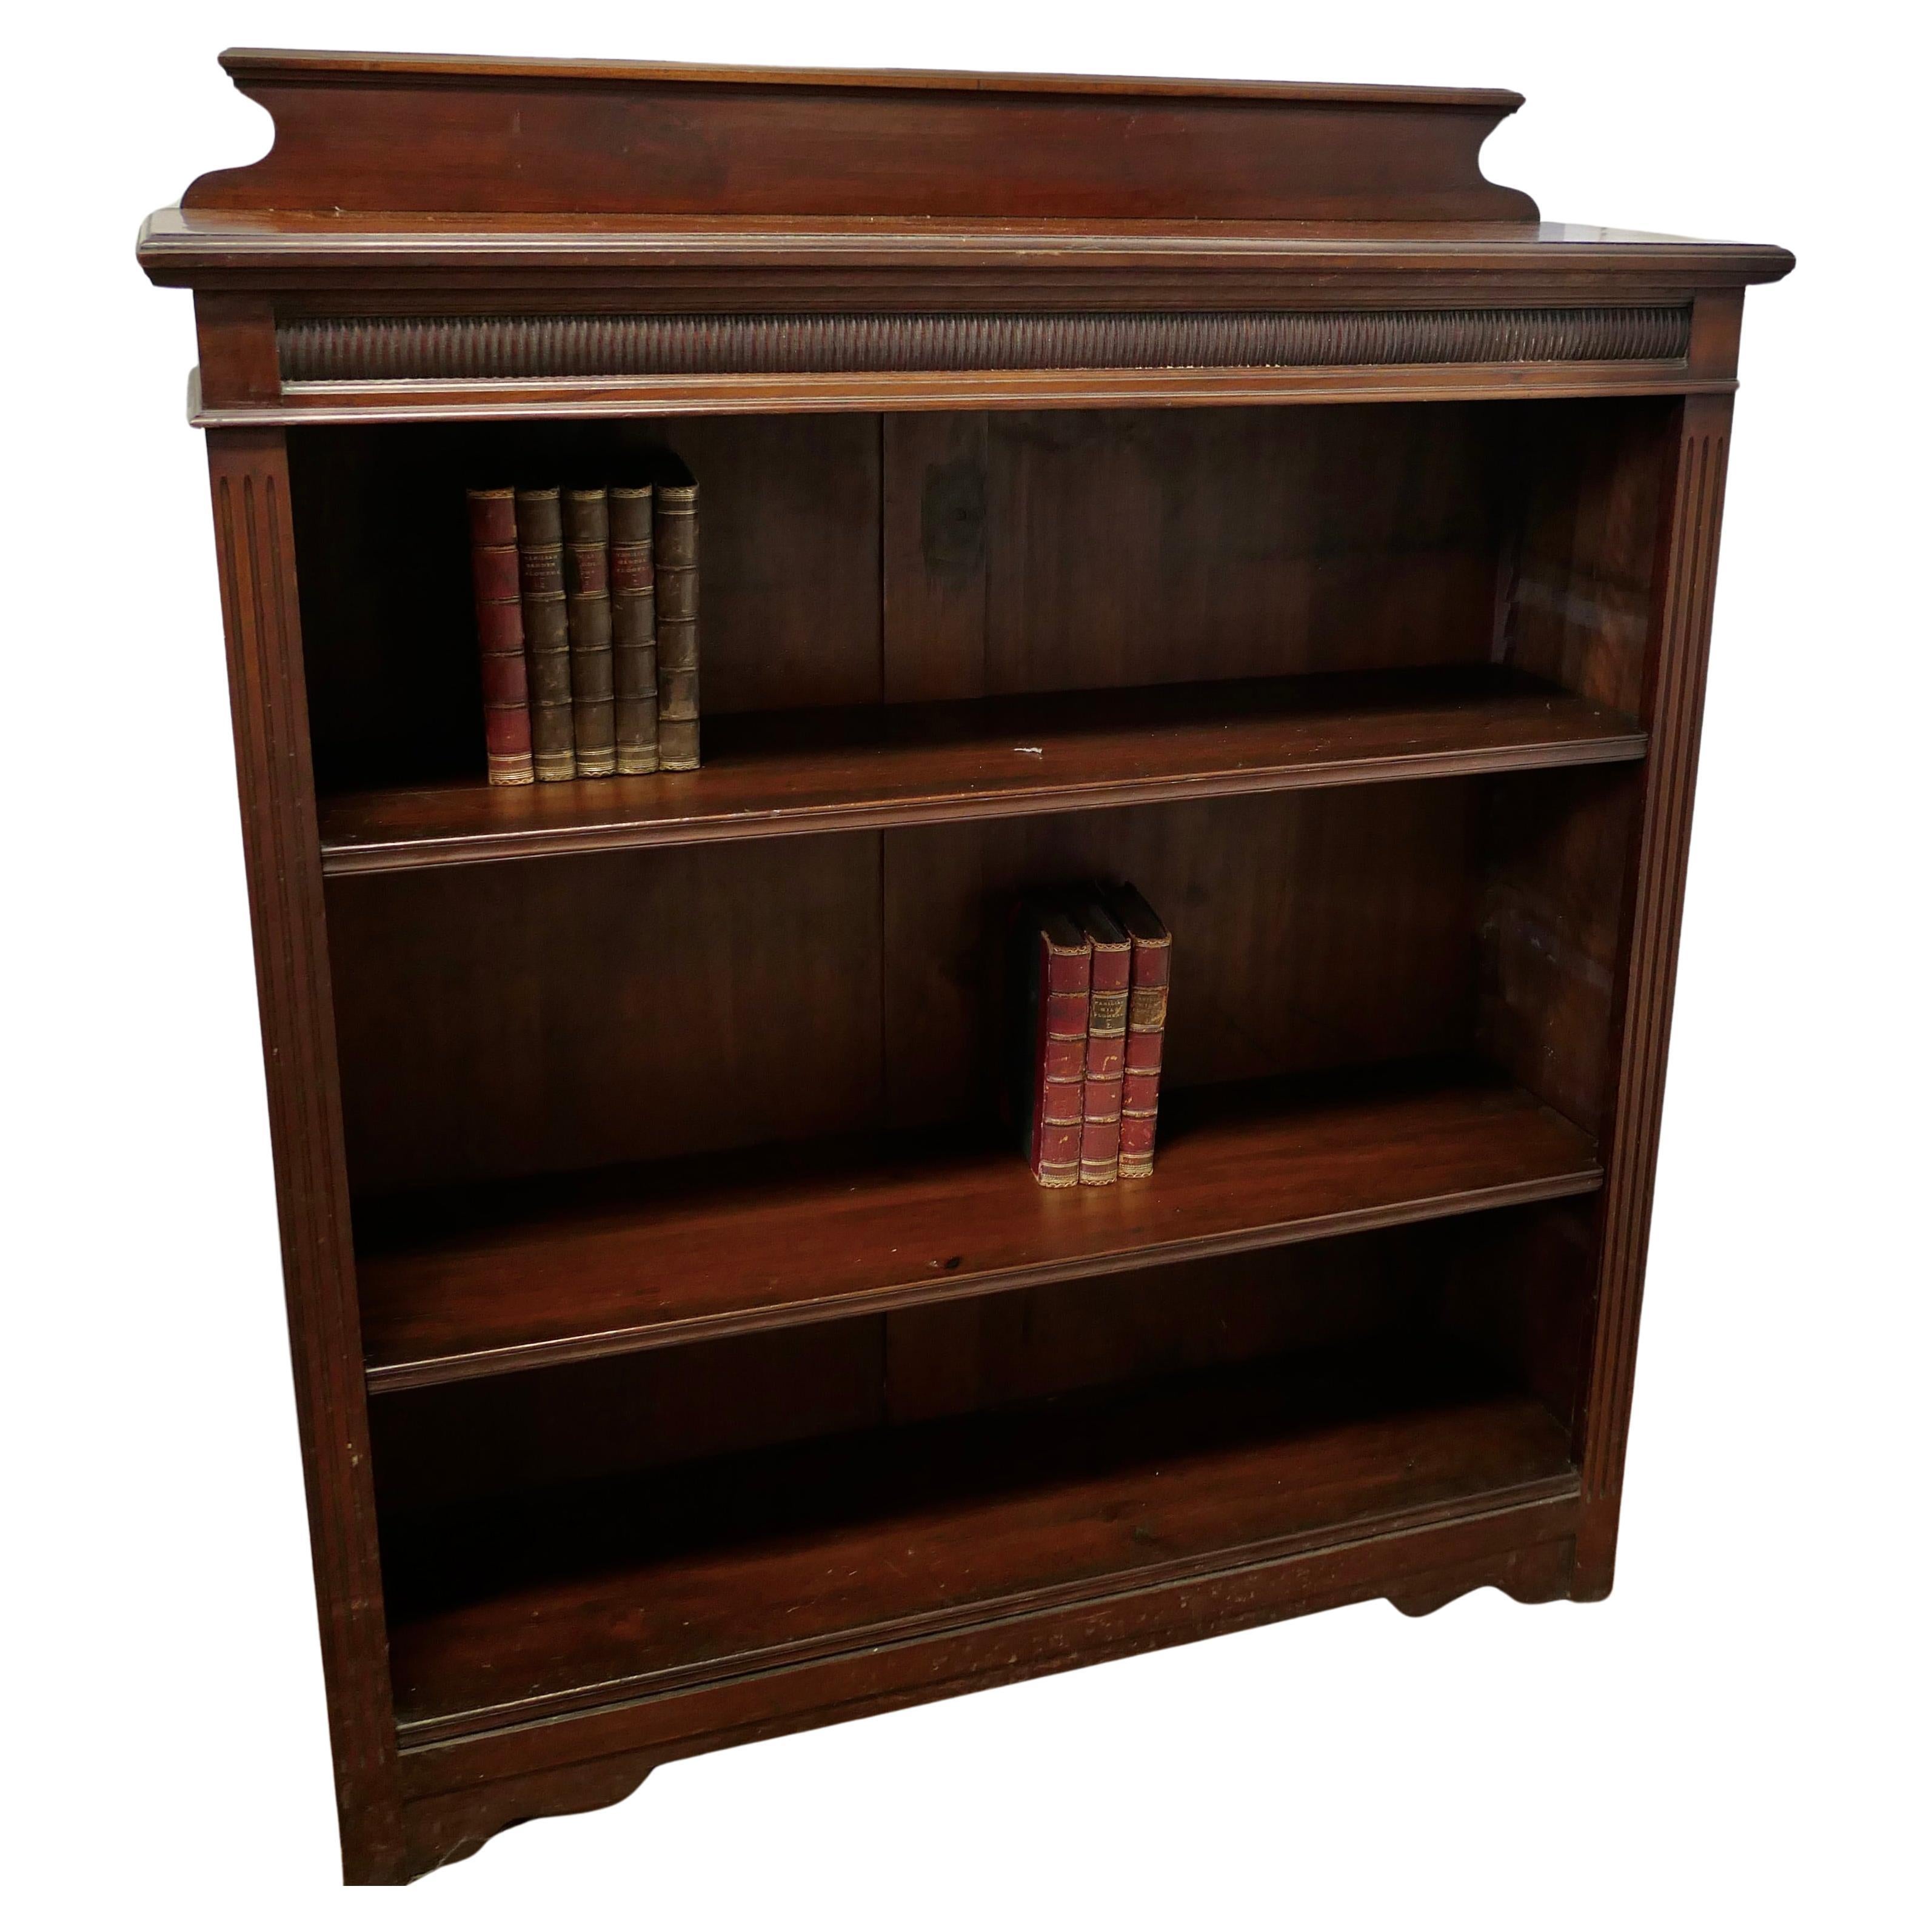 19th Century Open Bookcase.  This is a good roomy bookcase  